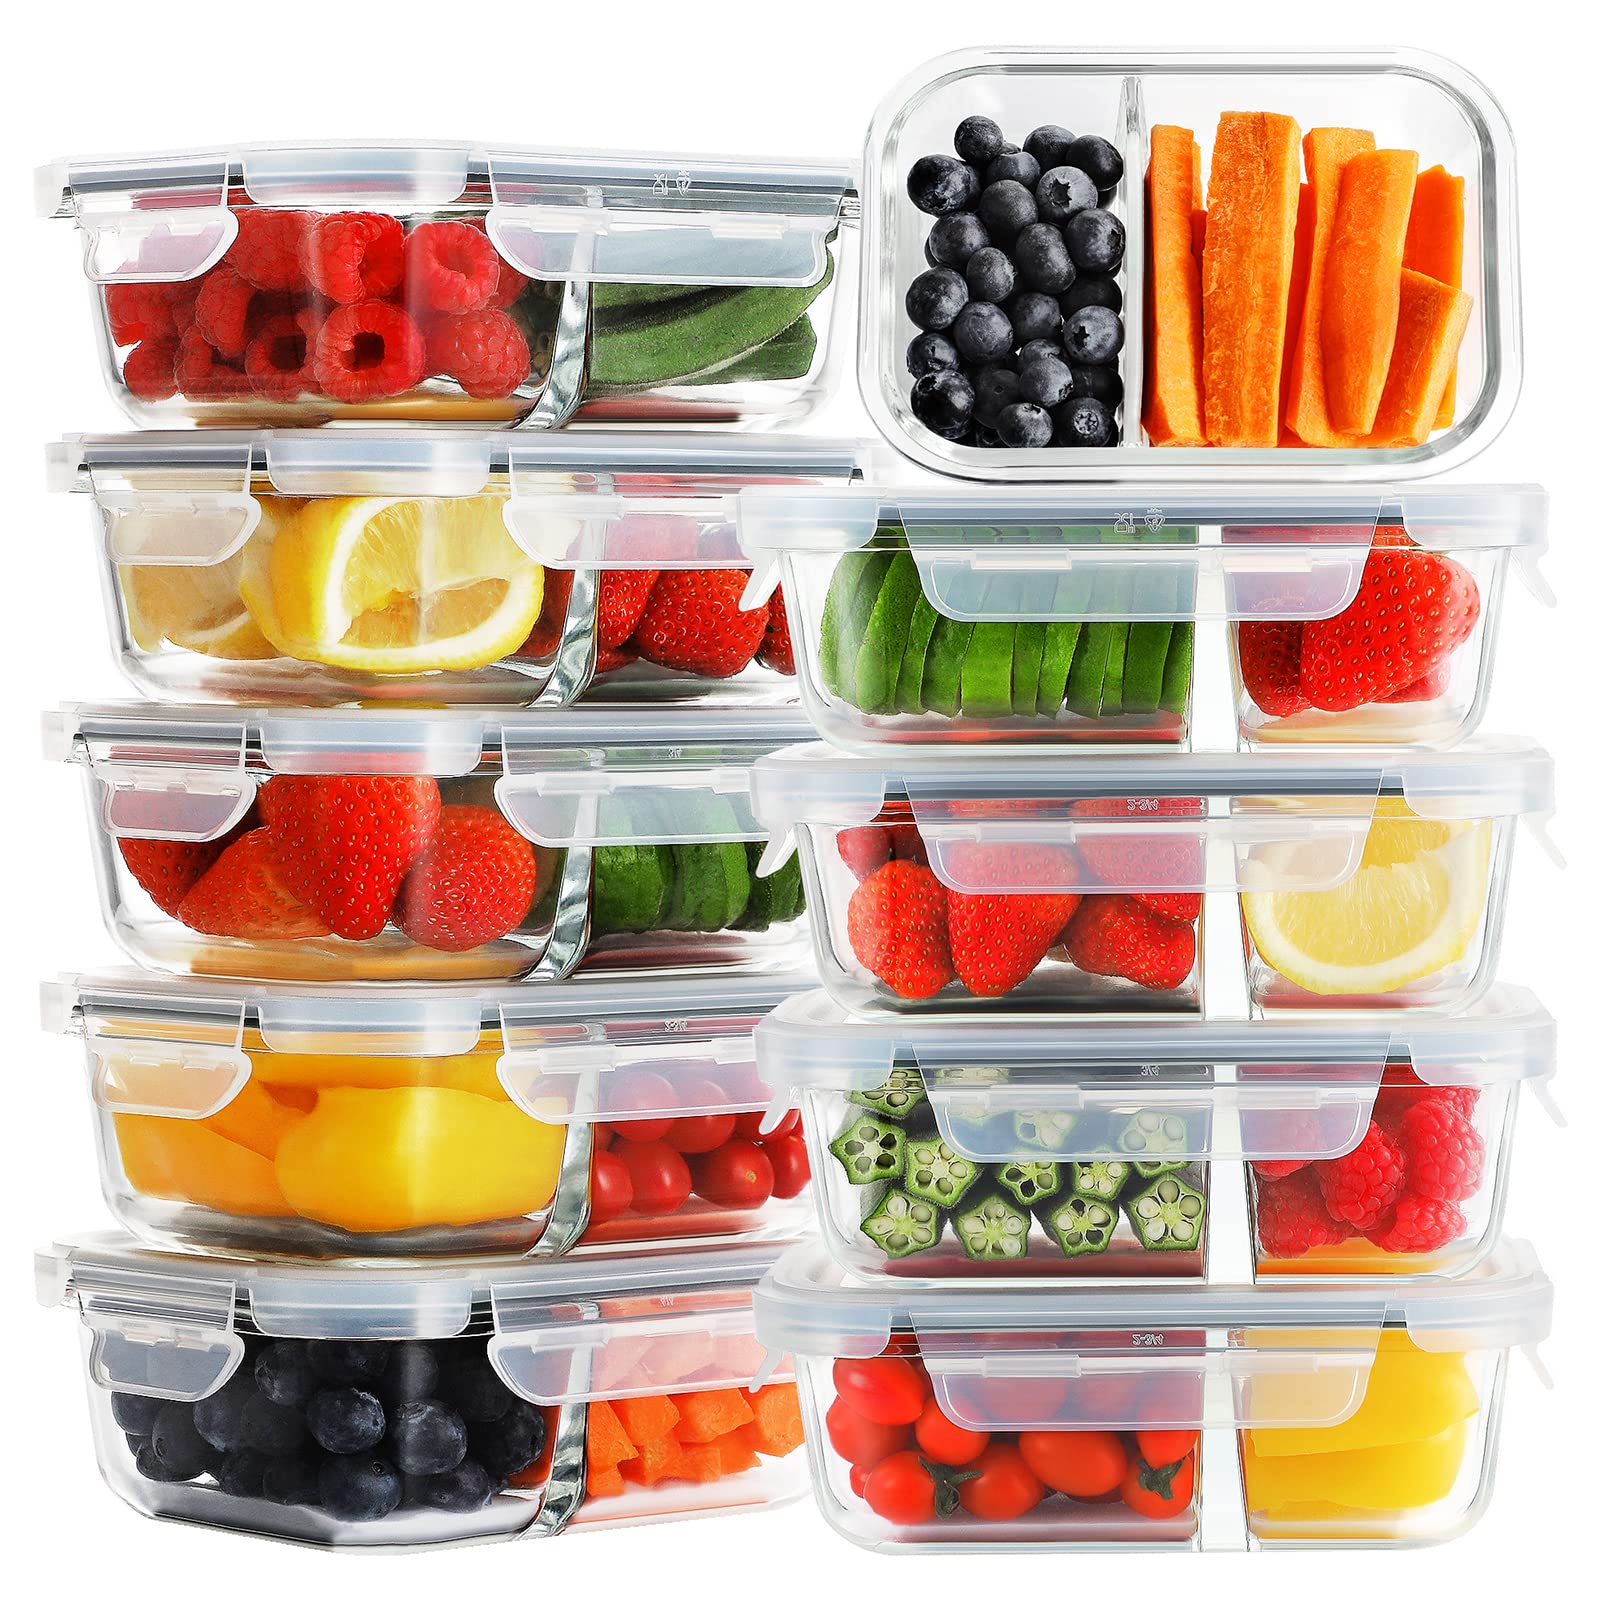 Bayco 10 Pack Glass Meal Prep Containers 2 Compartment, Glass Food Storage Containers with Lids, Airtight Glass Lunch Bento Boxes, BPA-Free & Leak Proof - 22.99 $22.99